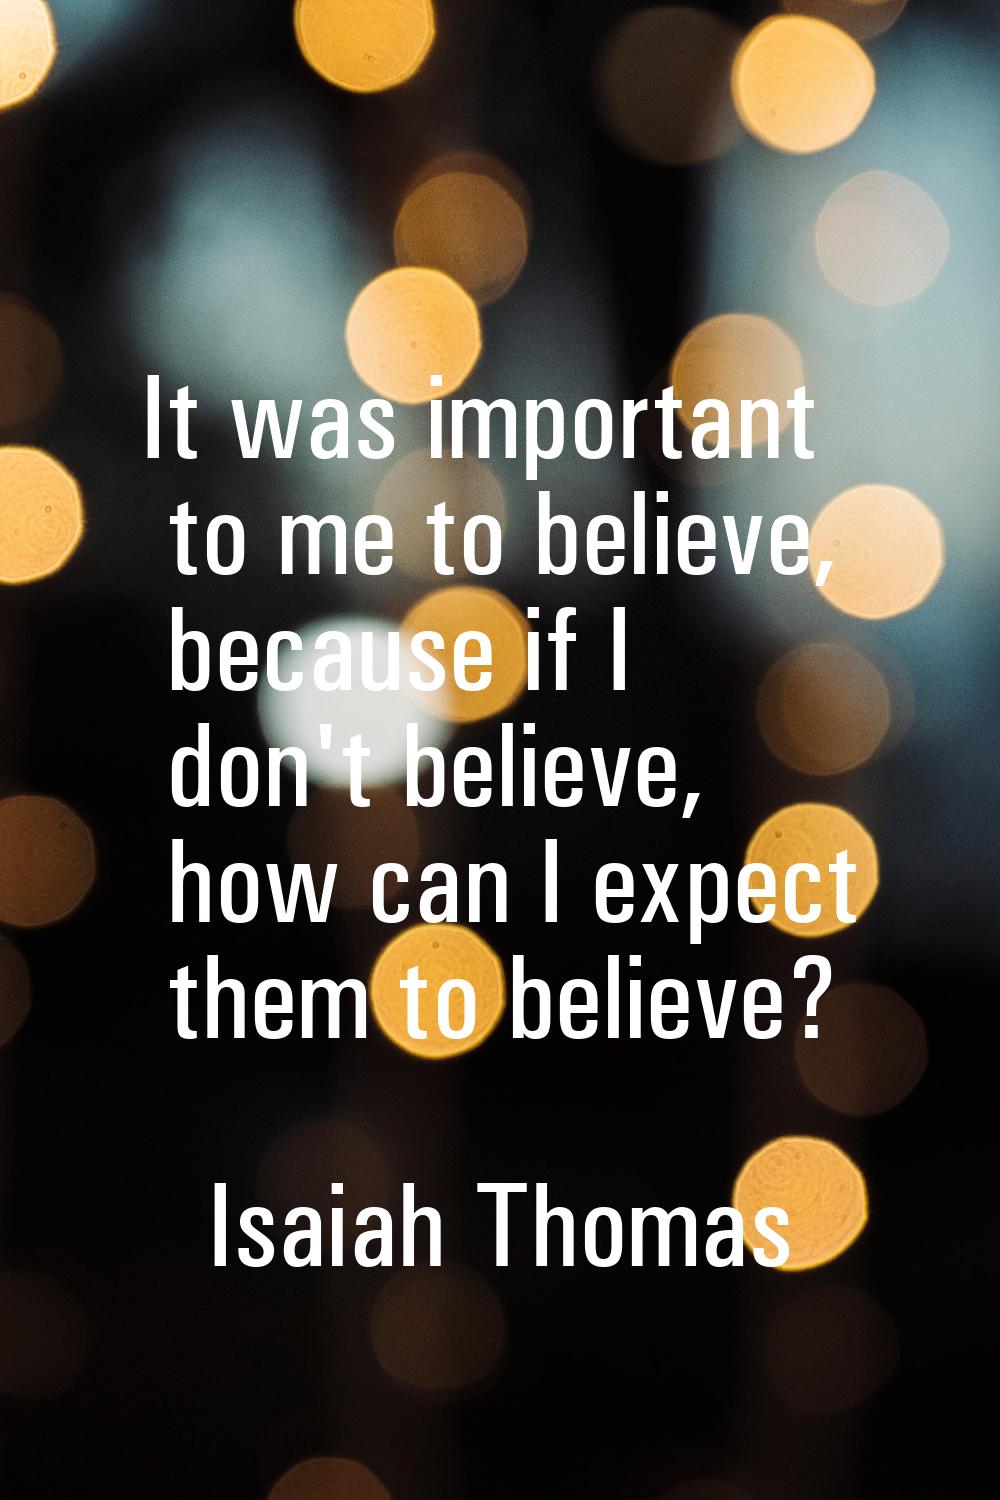 It was important to me to believe, because if I don't believe, how can I expect them to believe?